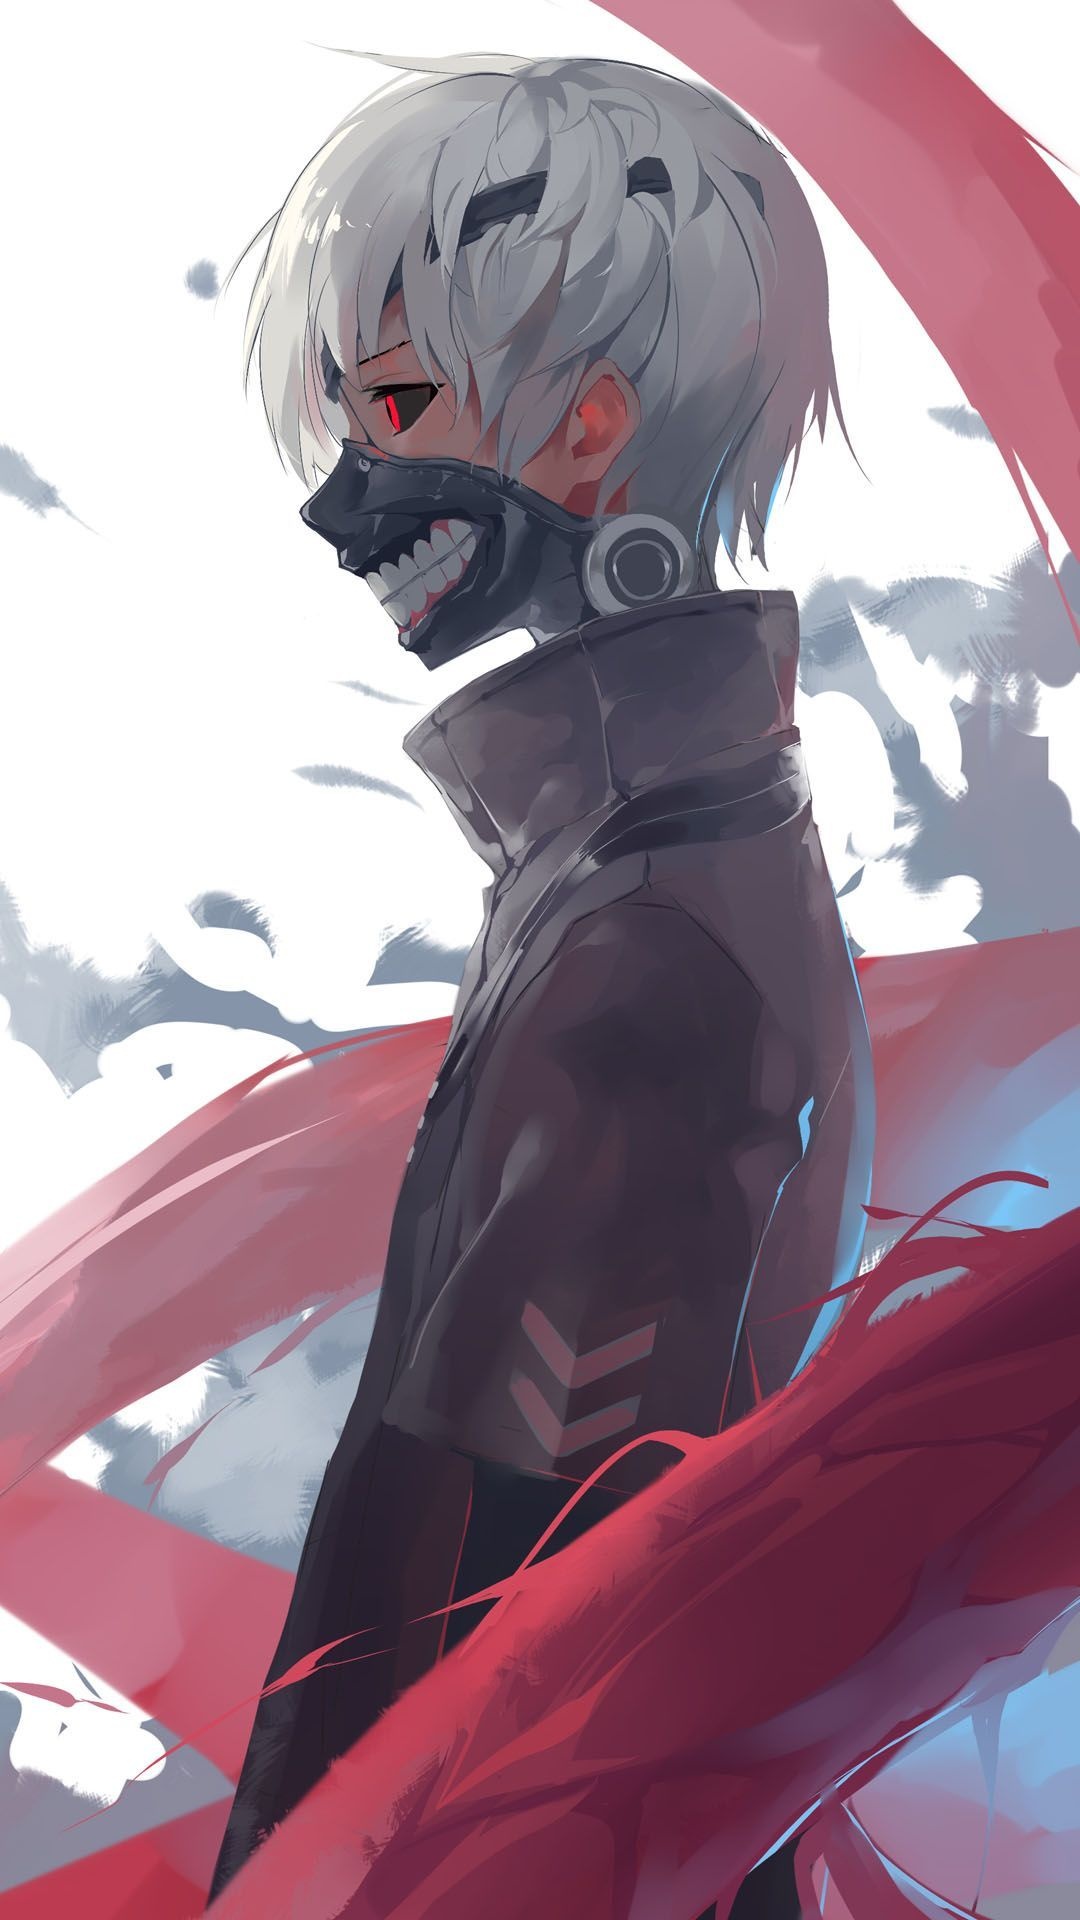 Tokyo Ghoul anime, Tokyo Ghoul wallpapers, Desktop iPhone Android, Mobile wallpapers, 1080x1920 Full HD Handy